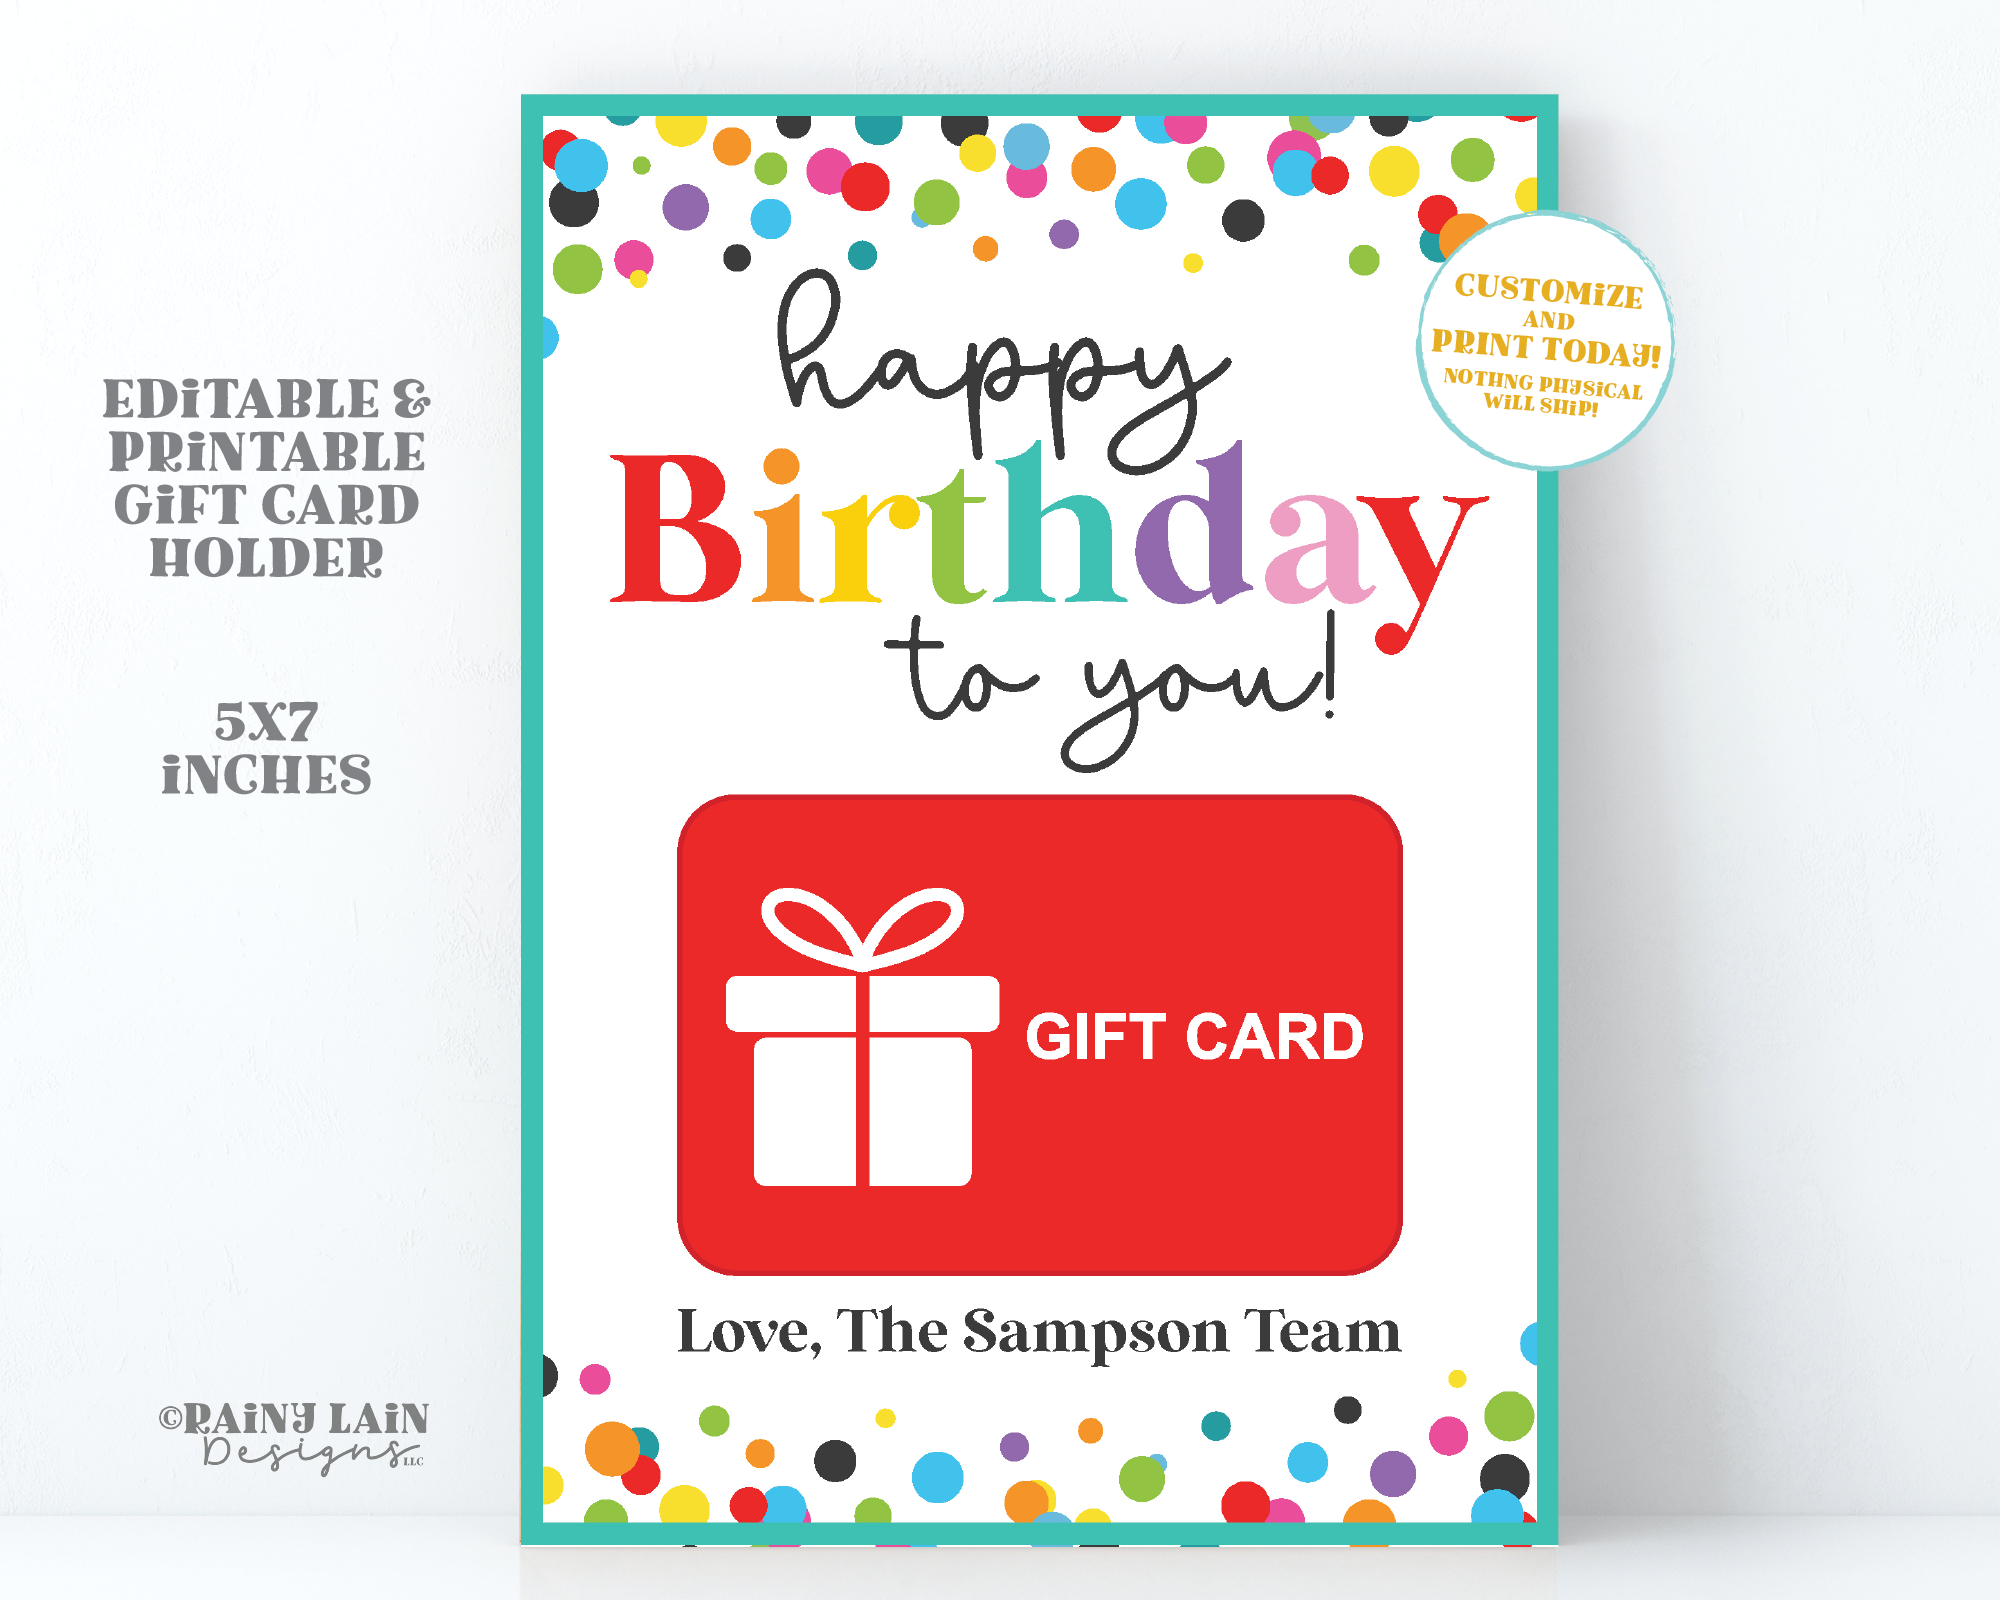 Happy Birthday Gift Card Holder Giftcard Holder From Group Office School Employee Appreciation Company Staff Corporate Teacher PTO PTA